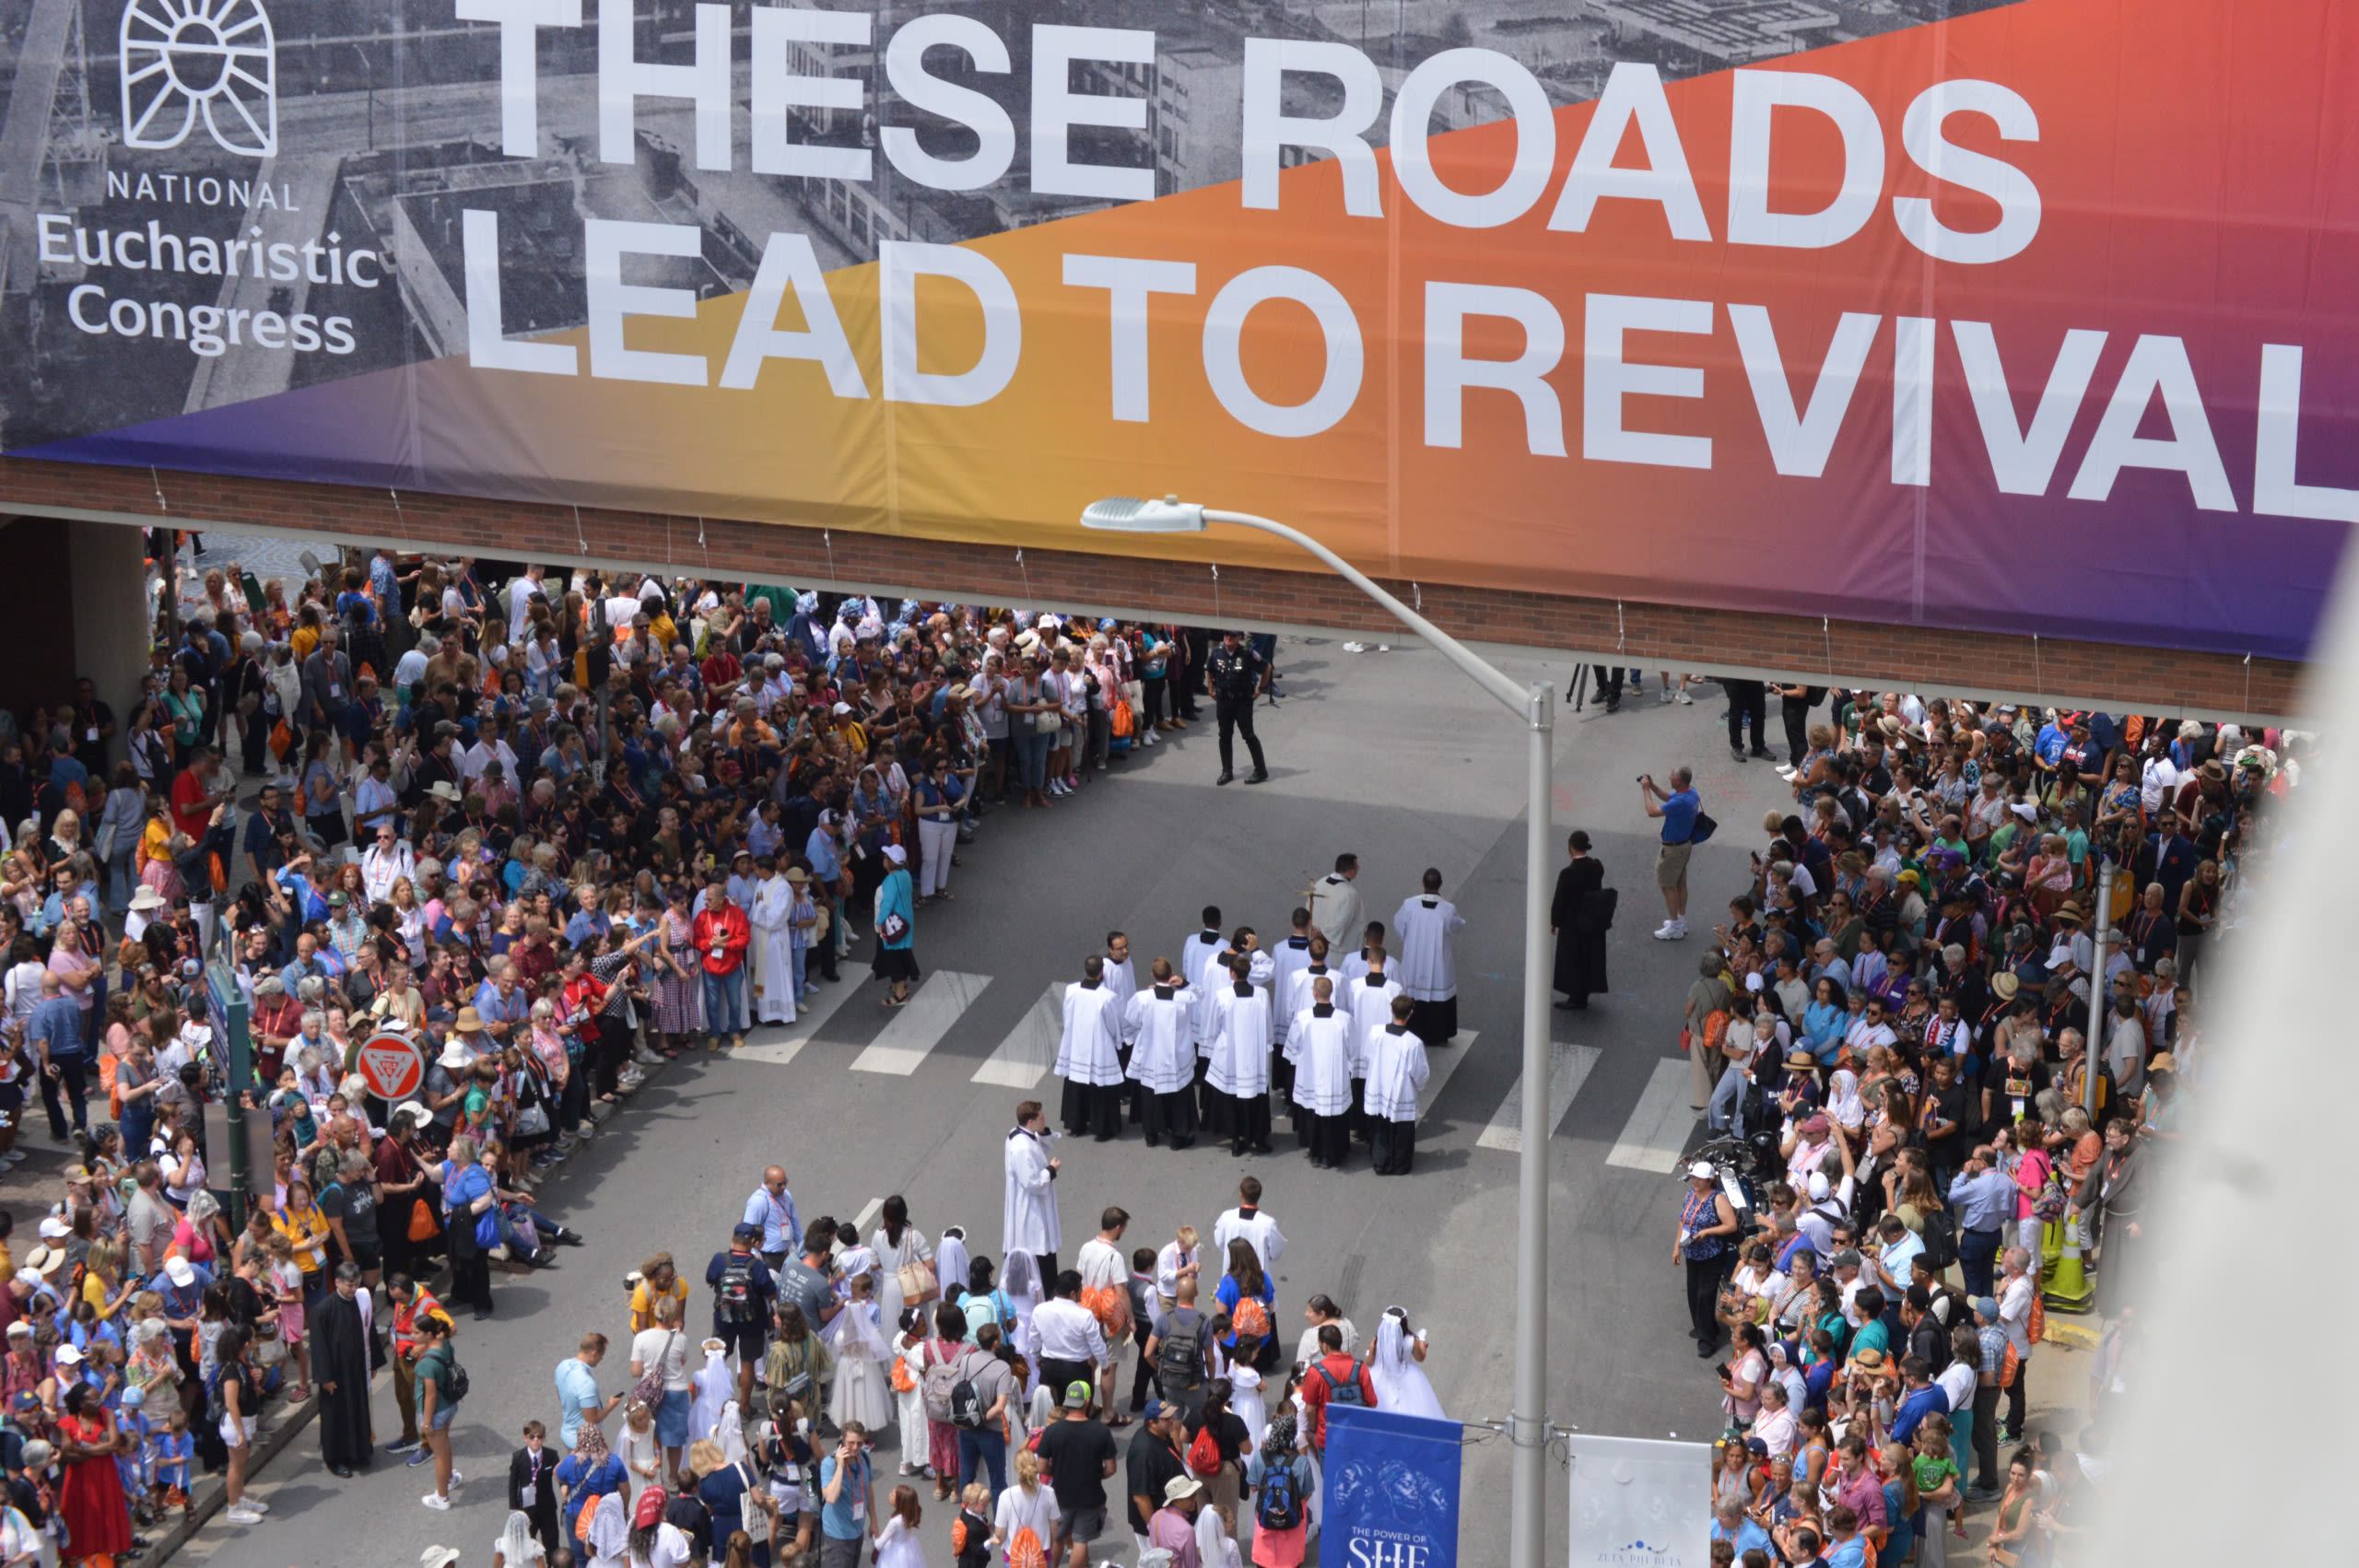 Tens of thousands of Catholics walk through downtown Indy in spiritual procession - Indianapolis Business Journal